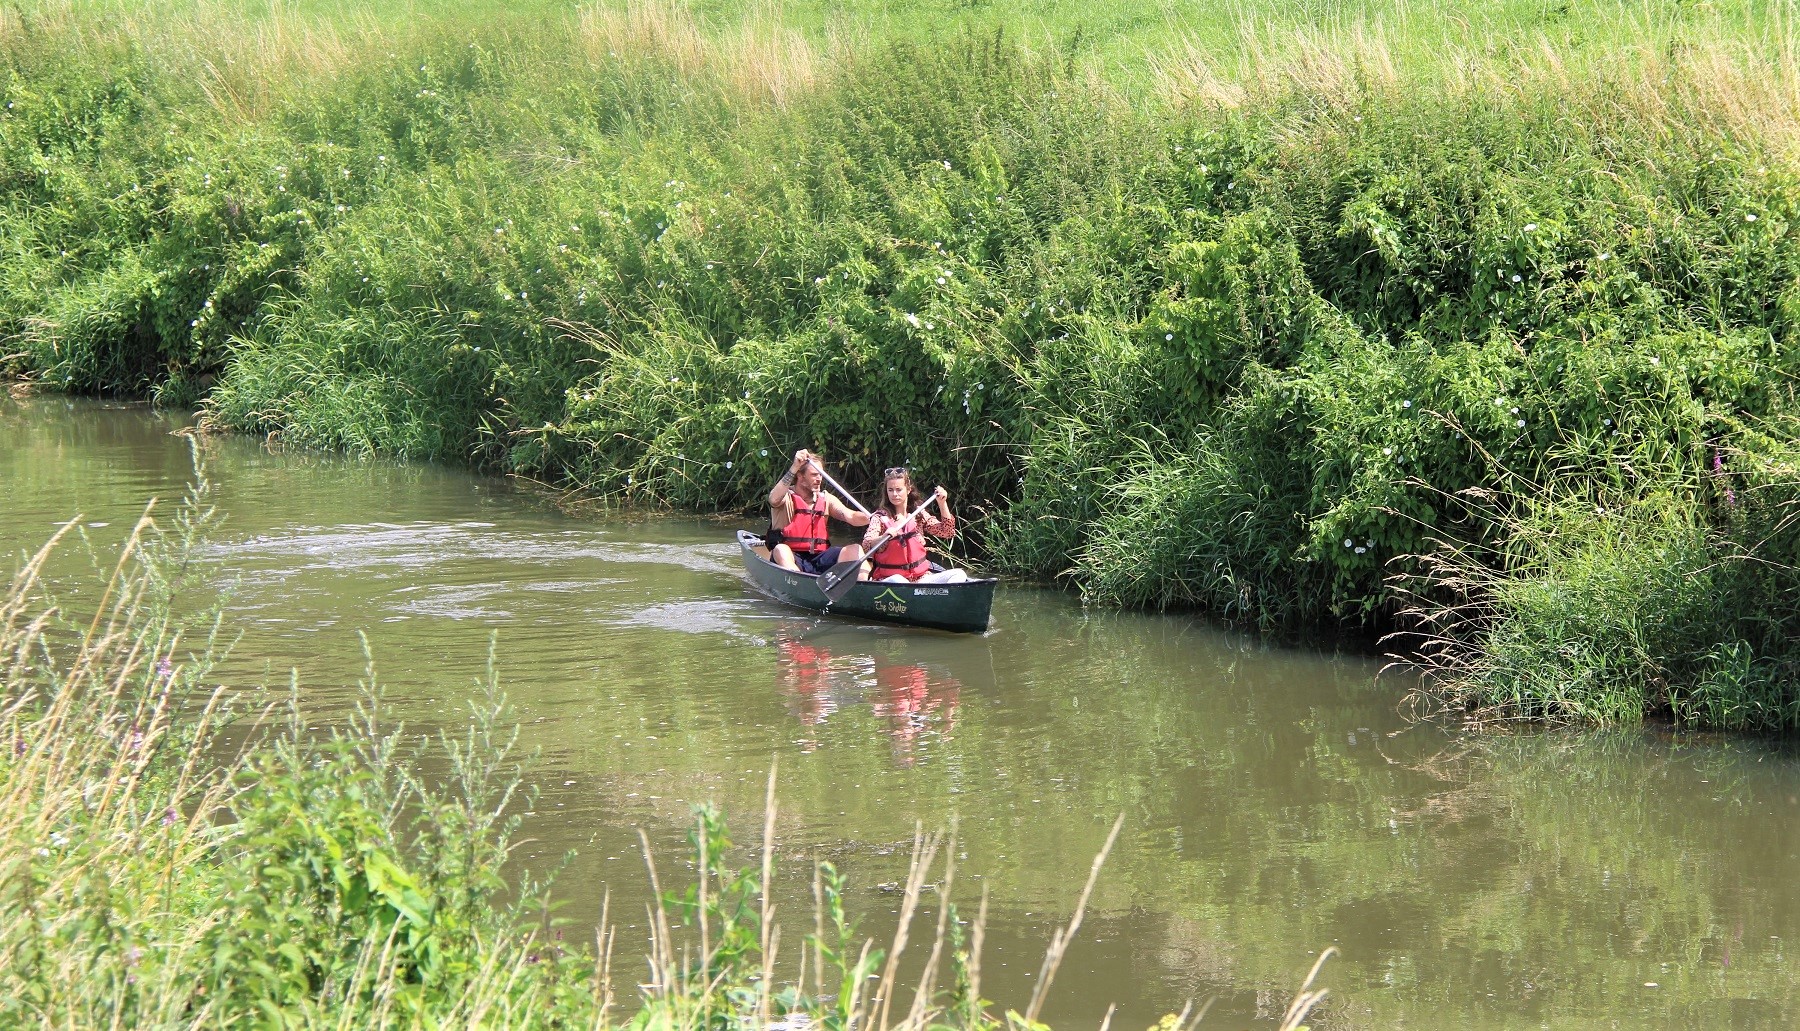 Two people canoeing in Flemish Brabant